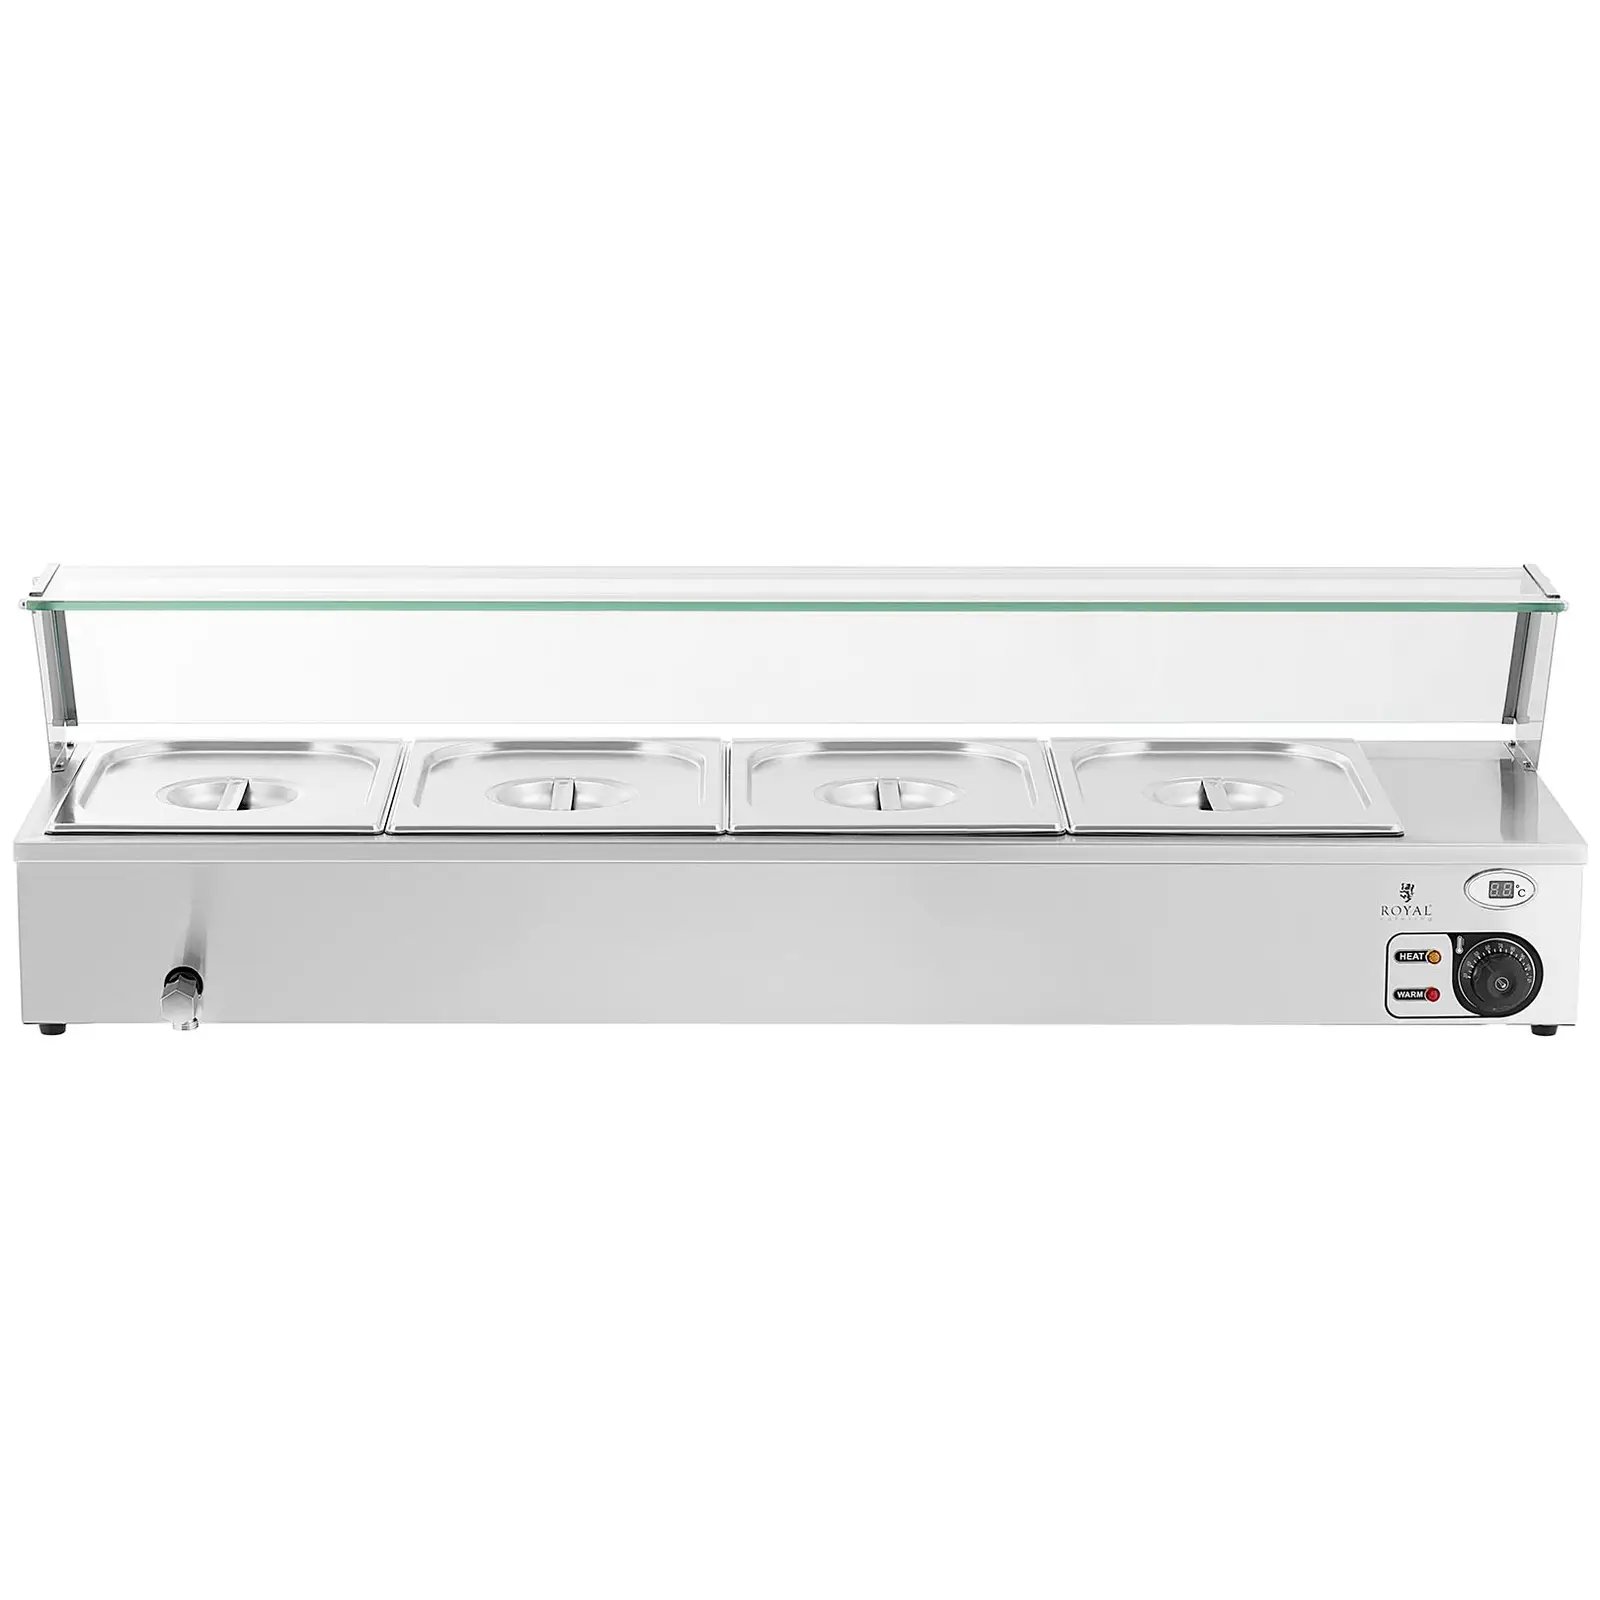 Factory second Bain-Marie - 2,000 W - 4 GN 1/2 - drain tap - glass protector